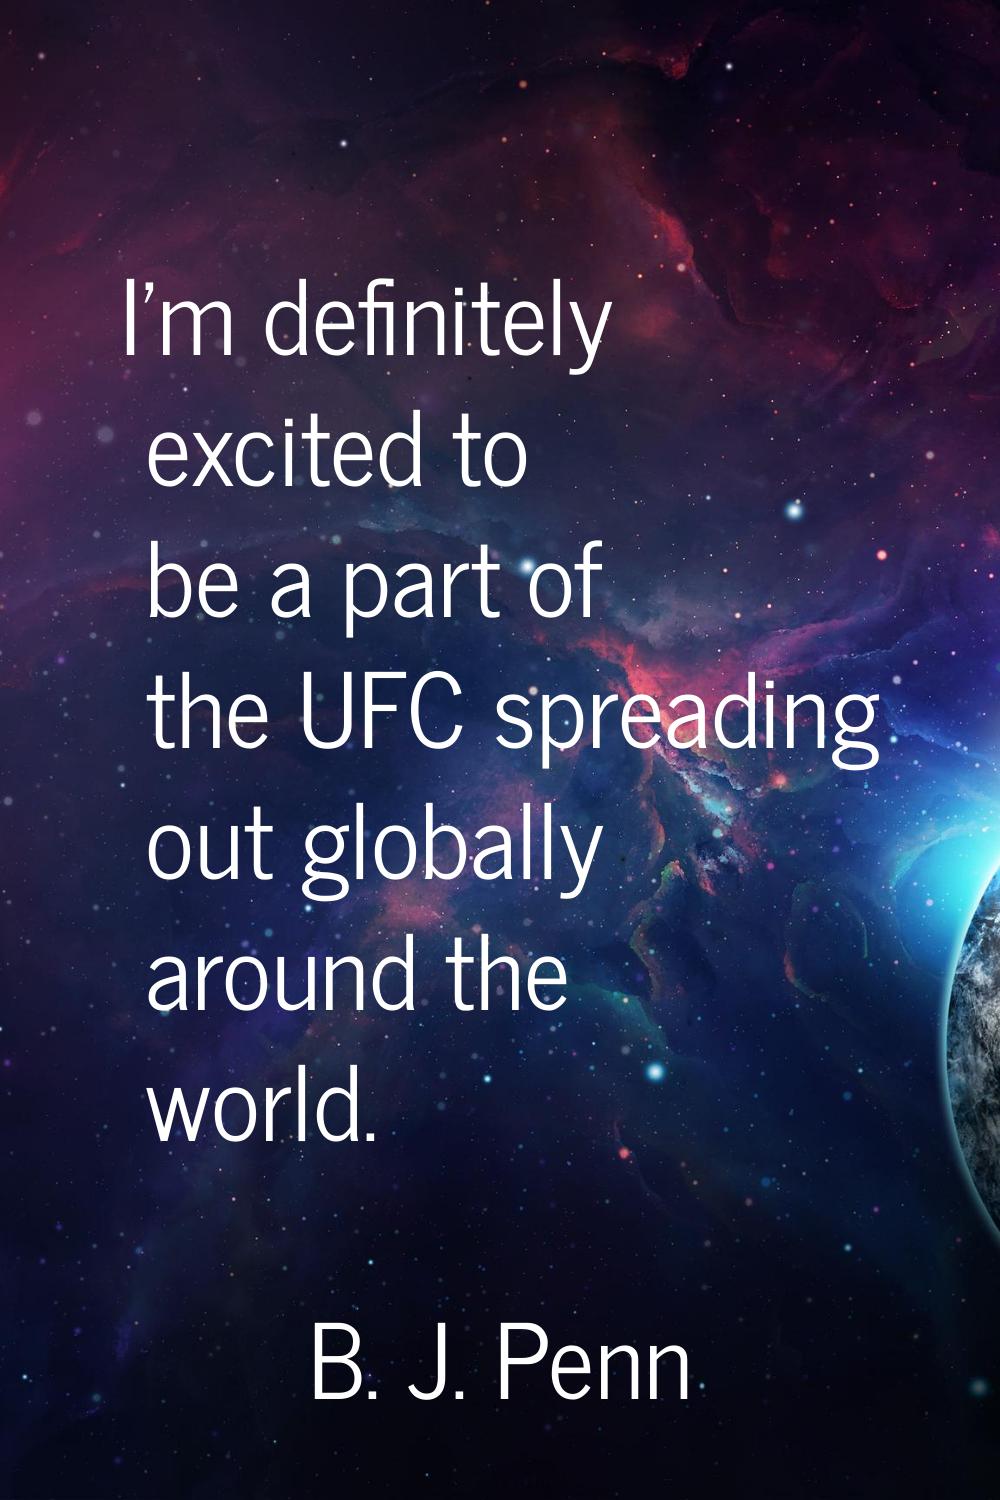 I'm definitely excited to be a part of the UFC spreading out globally around the world.